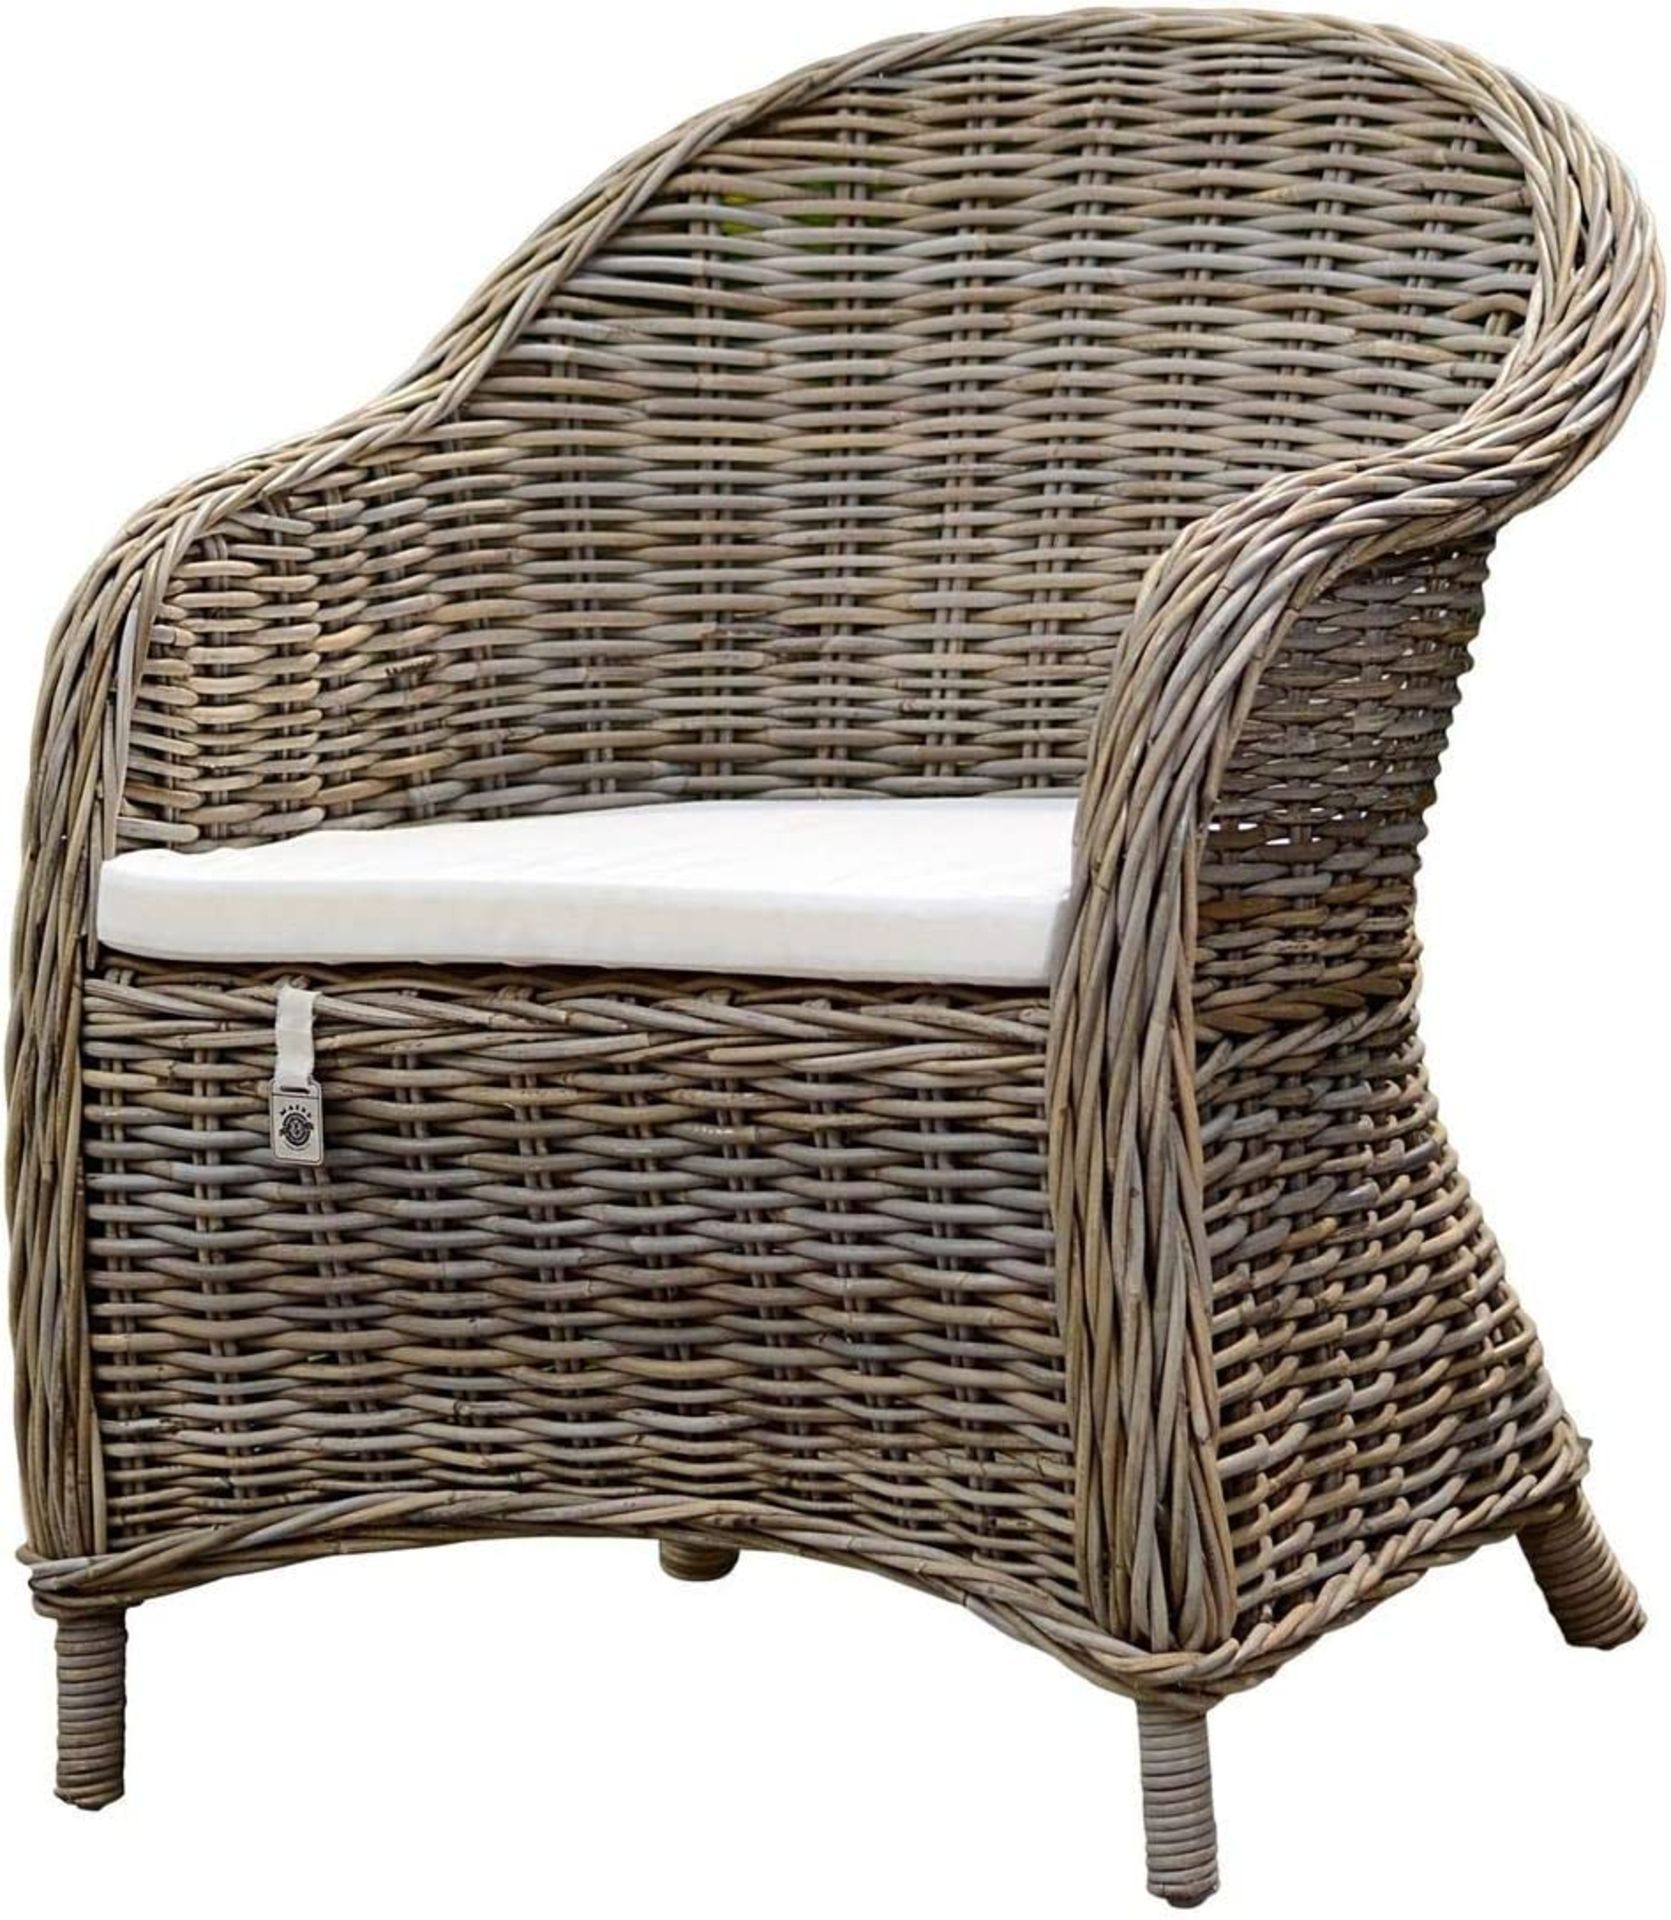 NEW & BOXED 2x Maine Furniture Co. Kubu Rattan Armchair with Cushion. (SR5). (SKU: M500156). STRONG, - Image 3 of 4